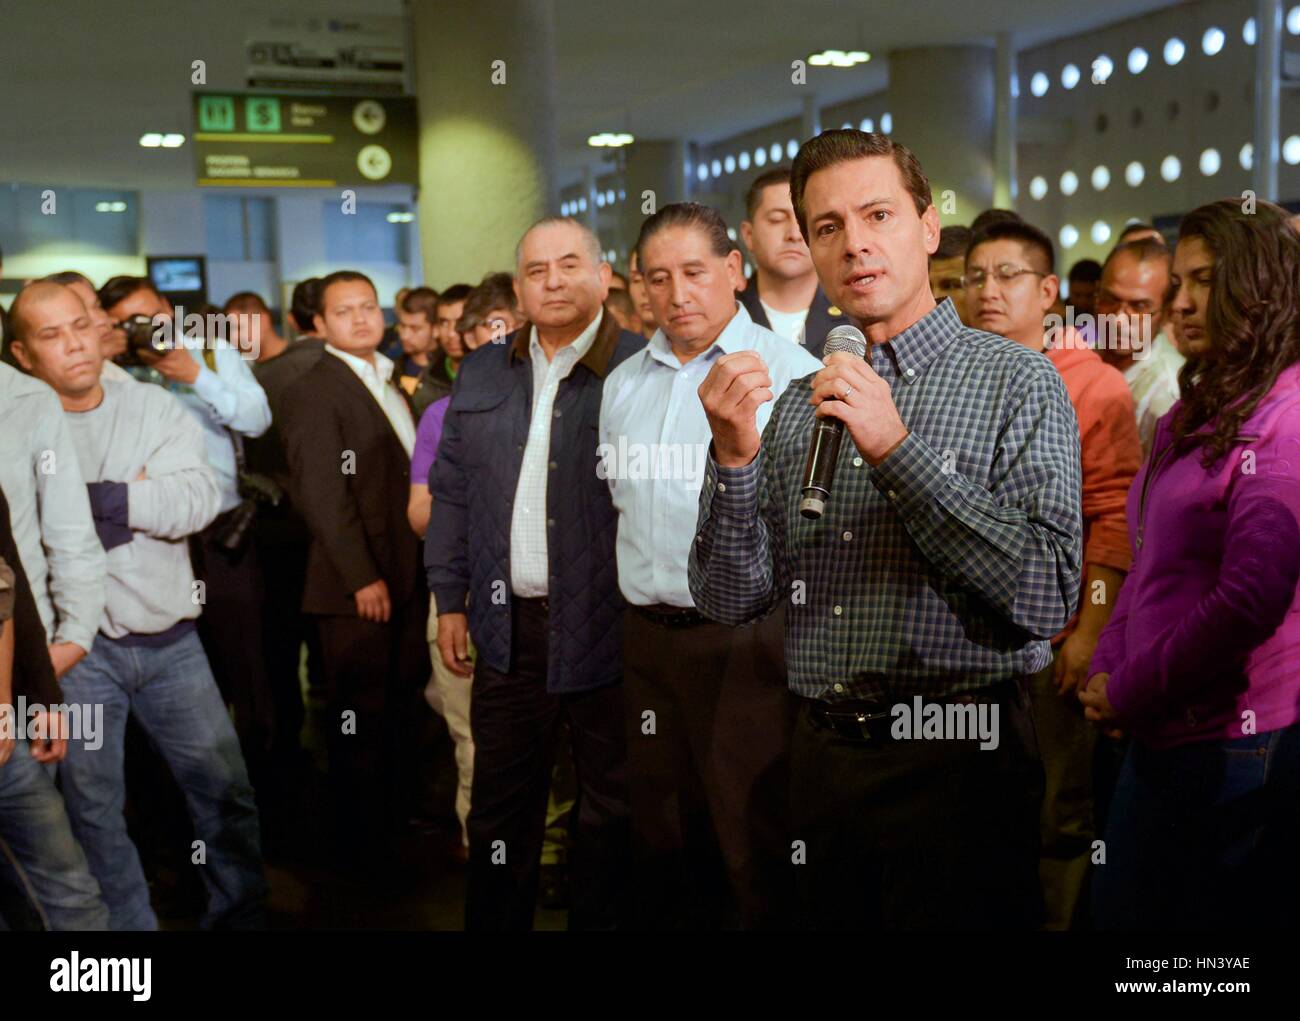 Mexico City, Mexico. 7th February, 2017. Mexican President Enrique Pena Nieto welcomes home 135 Mexican migrants deported from the United States on arrival at Mexico City International Airport February 7, 2017 in Mexico City, Mexico. The group was the first deportees since Donald Trump became President.     (Government of Mexico via Planetpix) Stock Photo